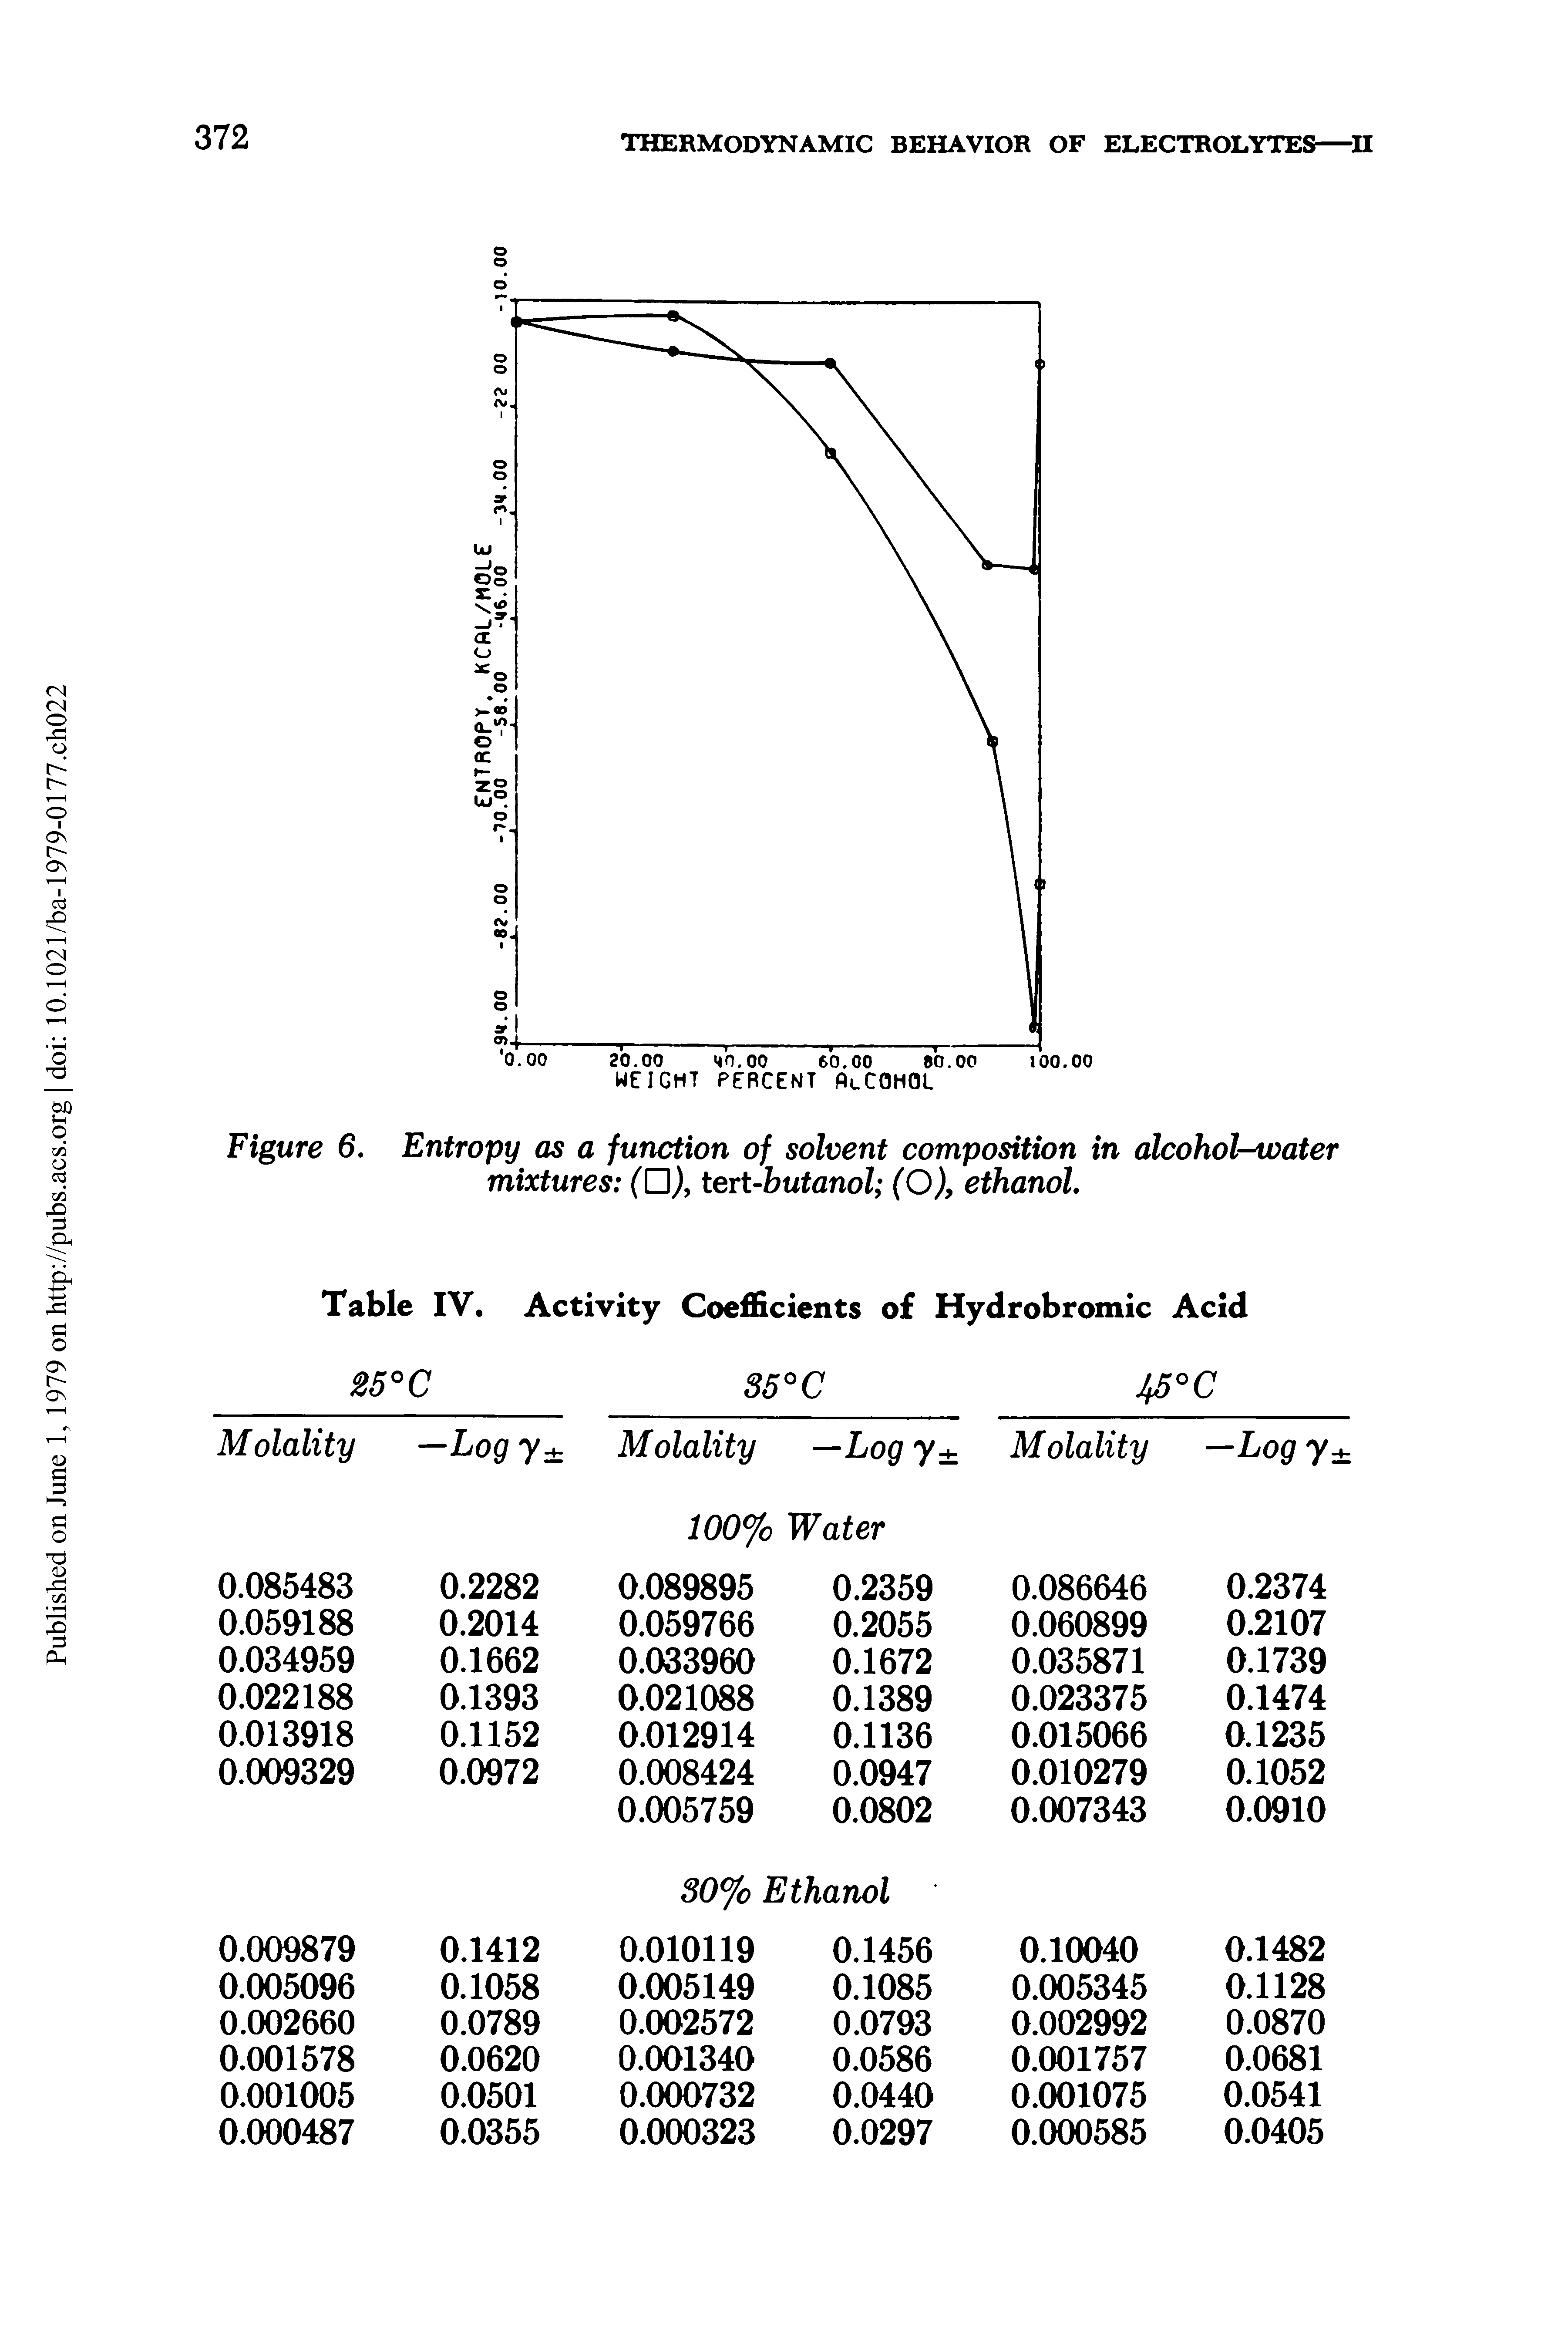 Figure 6. Entropy as a function of solvent composition in alcohol-water mixtures ( ,), tert-butanol (O), ethanol.